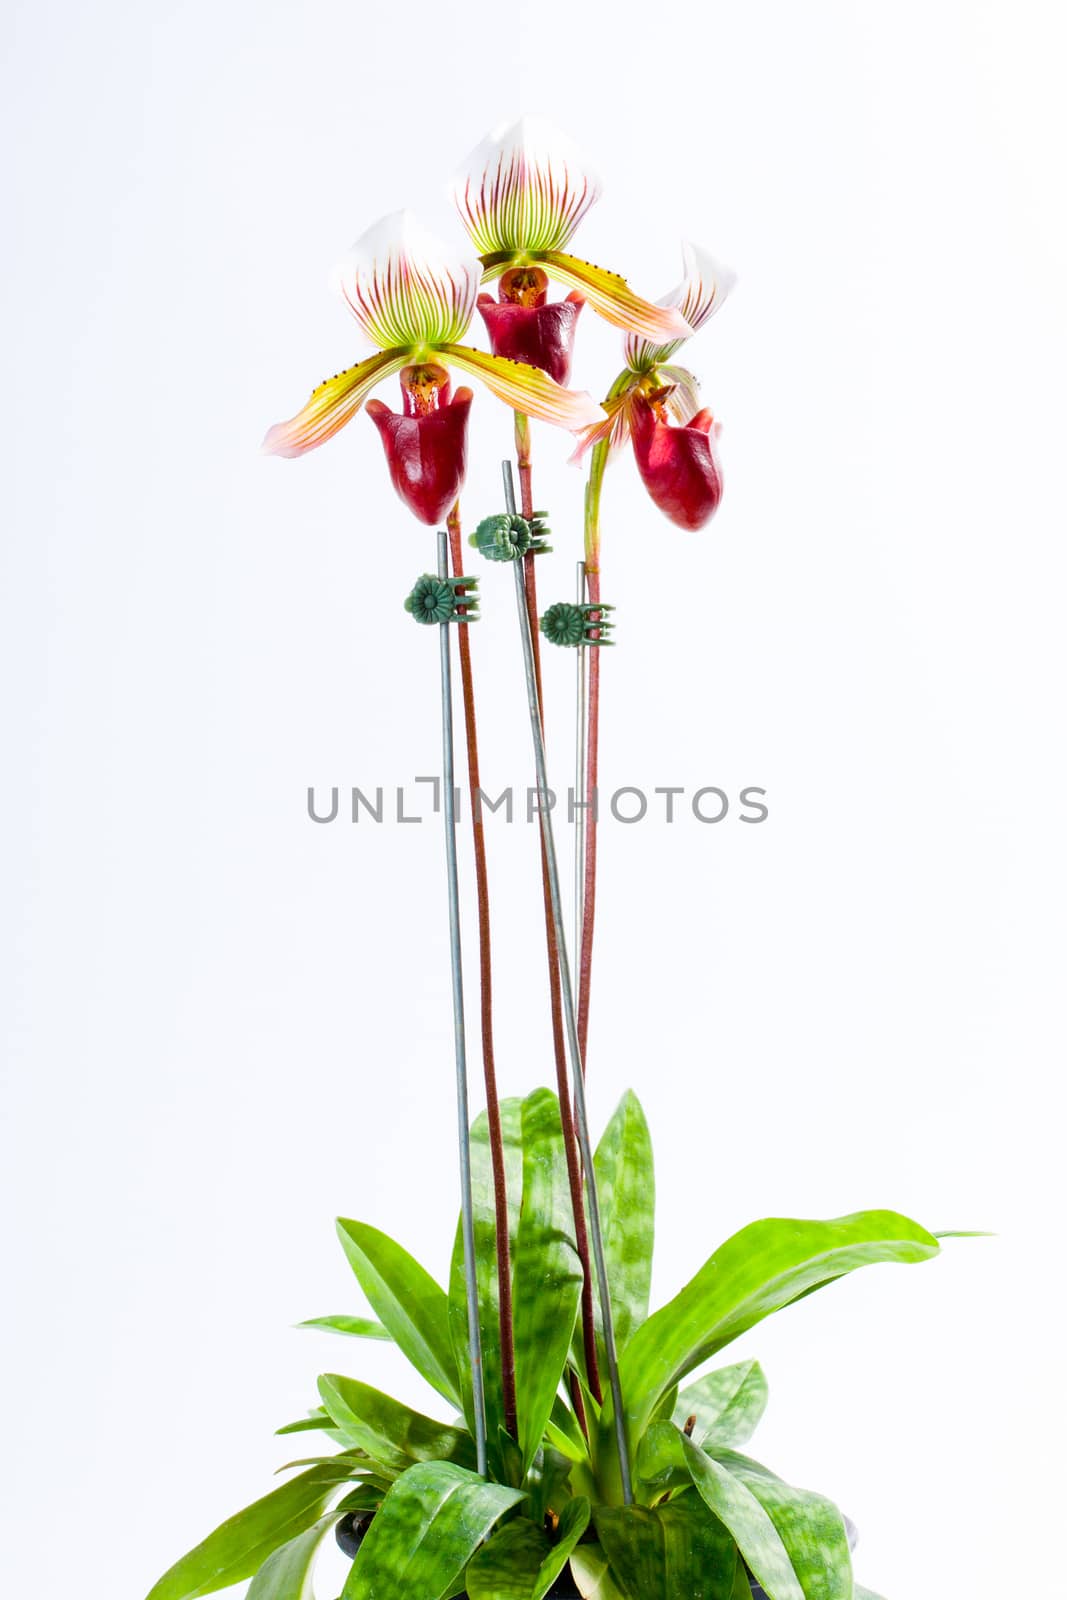 Paph. barbatum ('Red Pouch' x 'Barbara') by jee1999